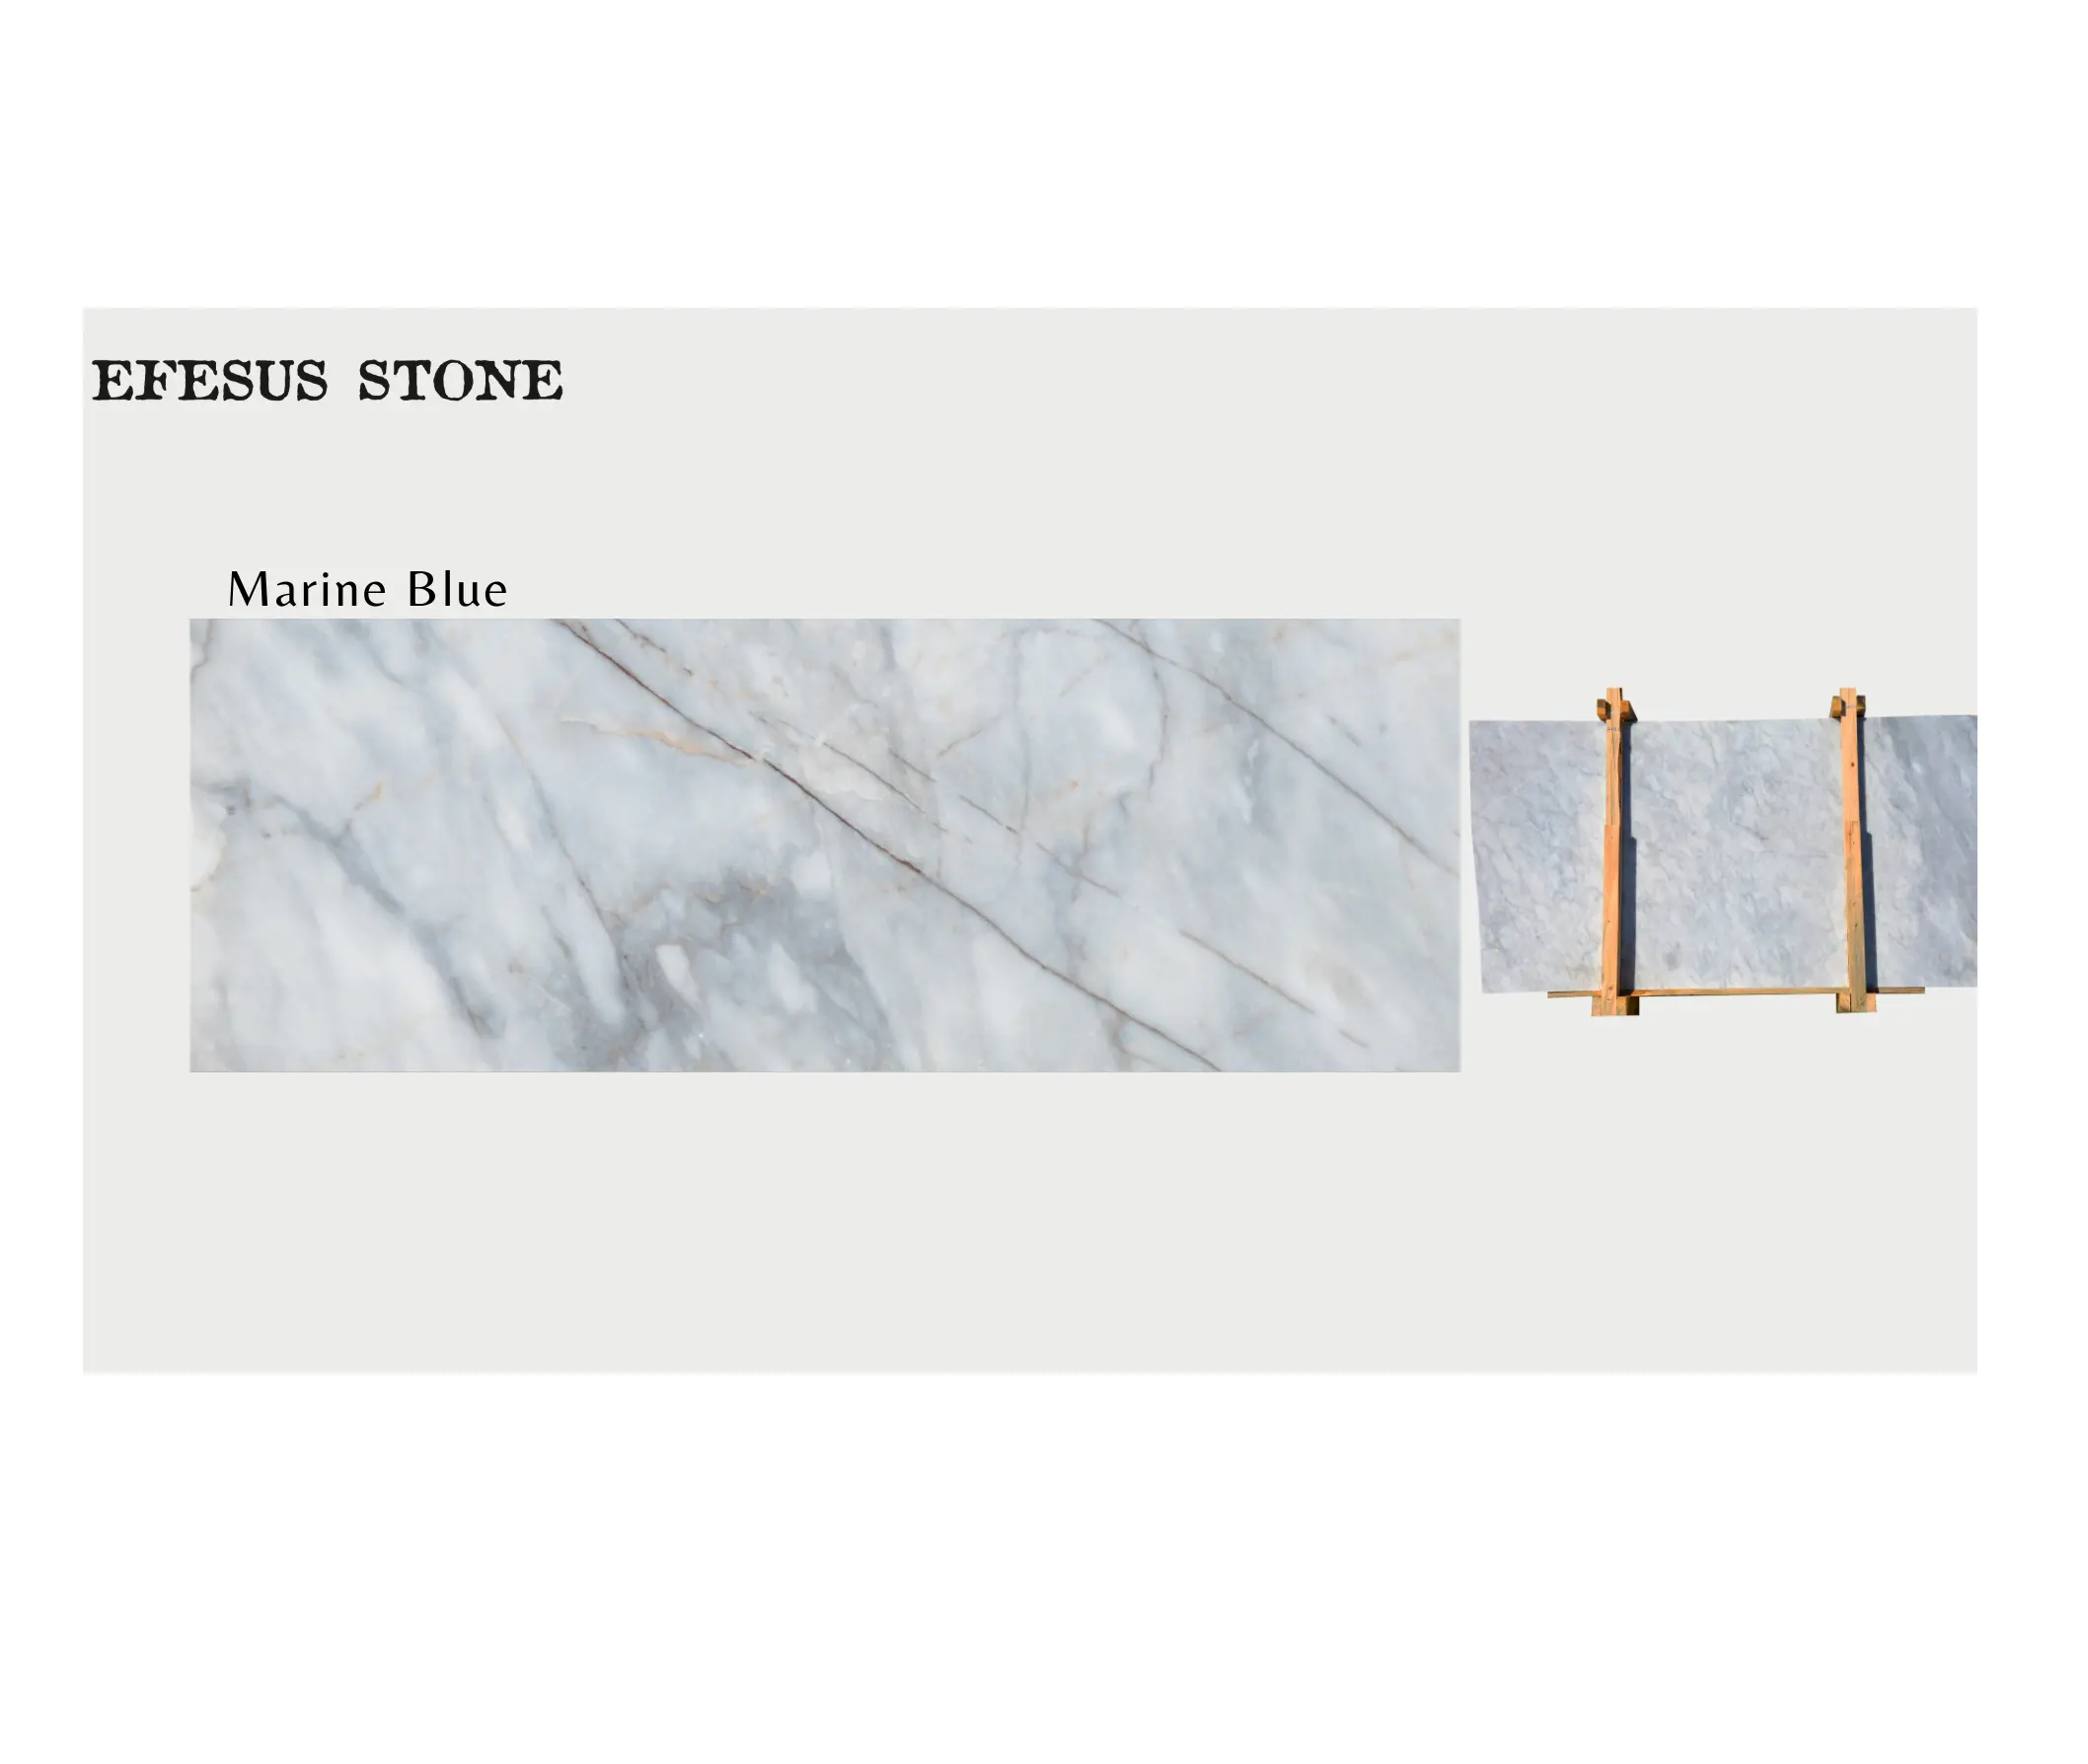 Hot Sale and Best Price ! White Color %100 Natural Stone Afyon White Marble Marine Blu 20mm Polished